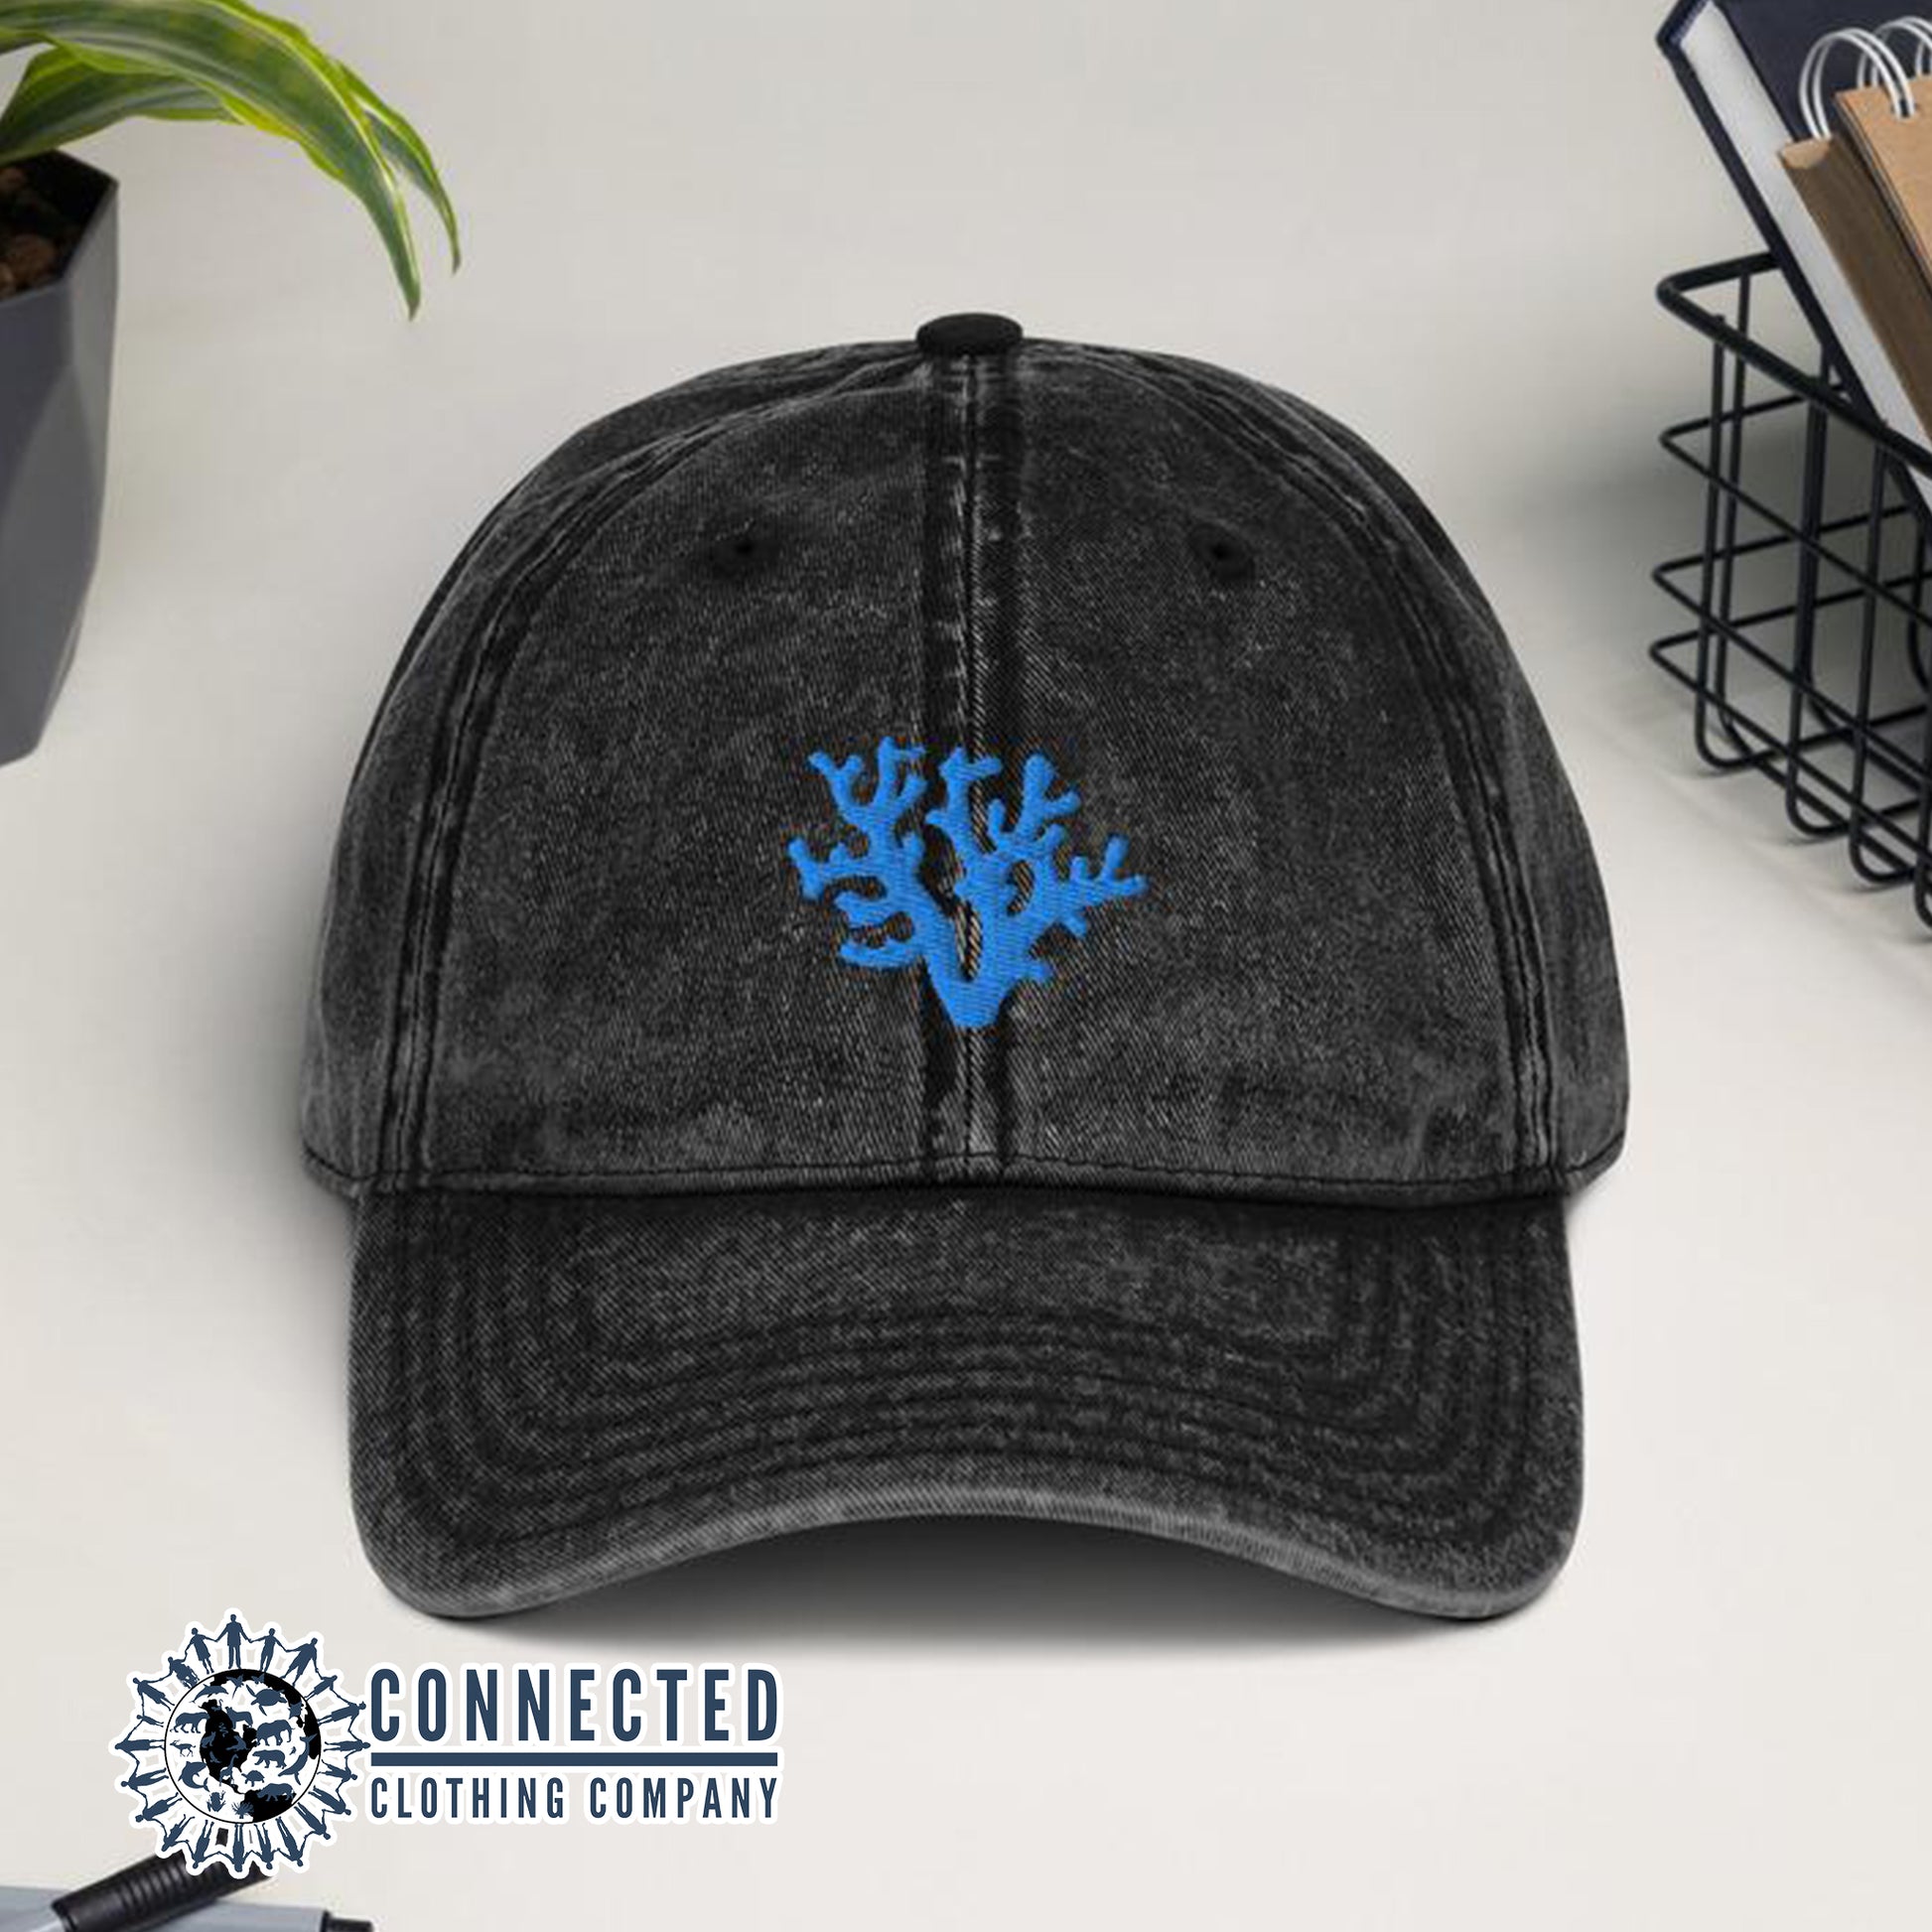 Black Coral Vintage Cotton Cap - Connected Clothing Company - Ethically and Sustainably Made - 10% donated to Mission Blue ocean conservation